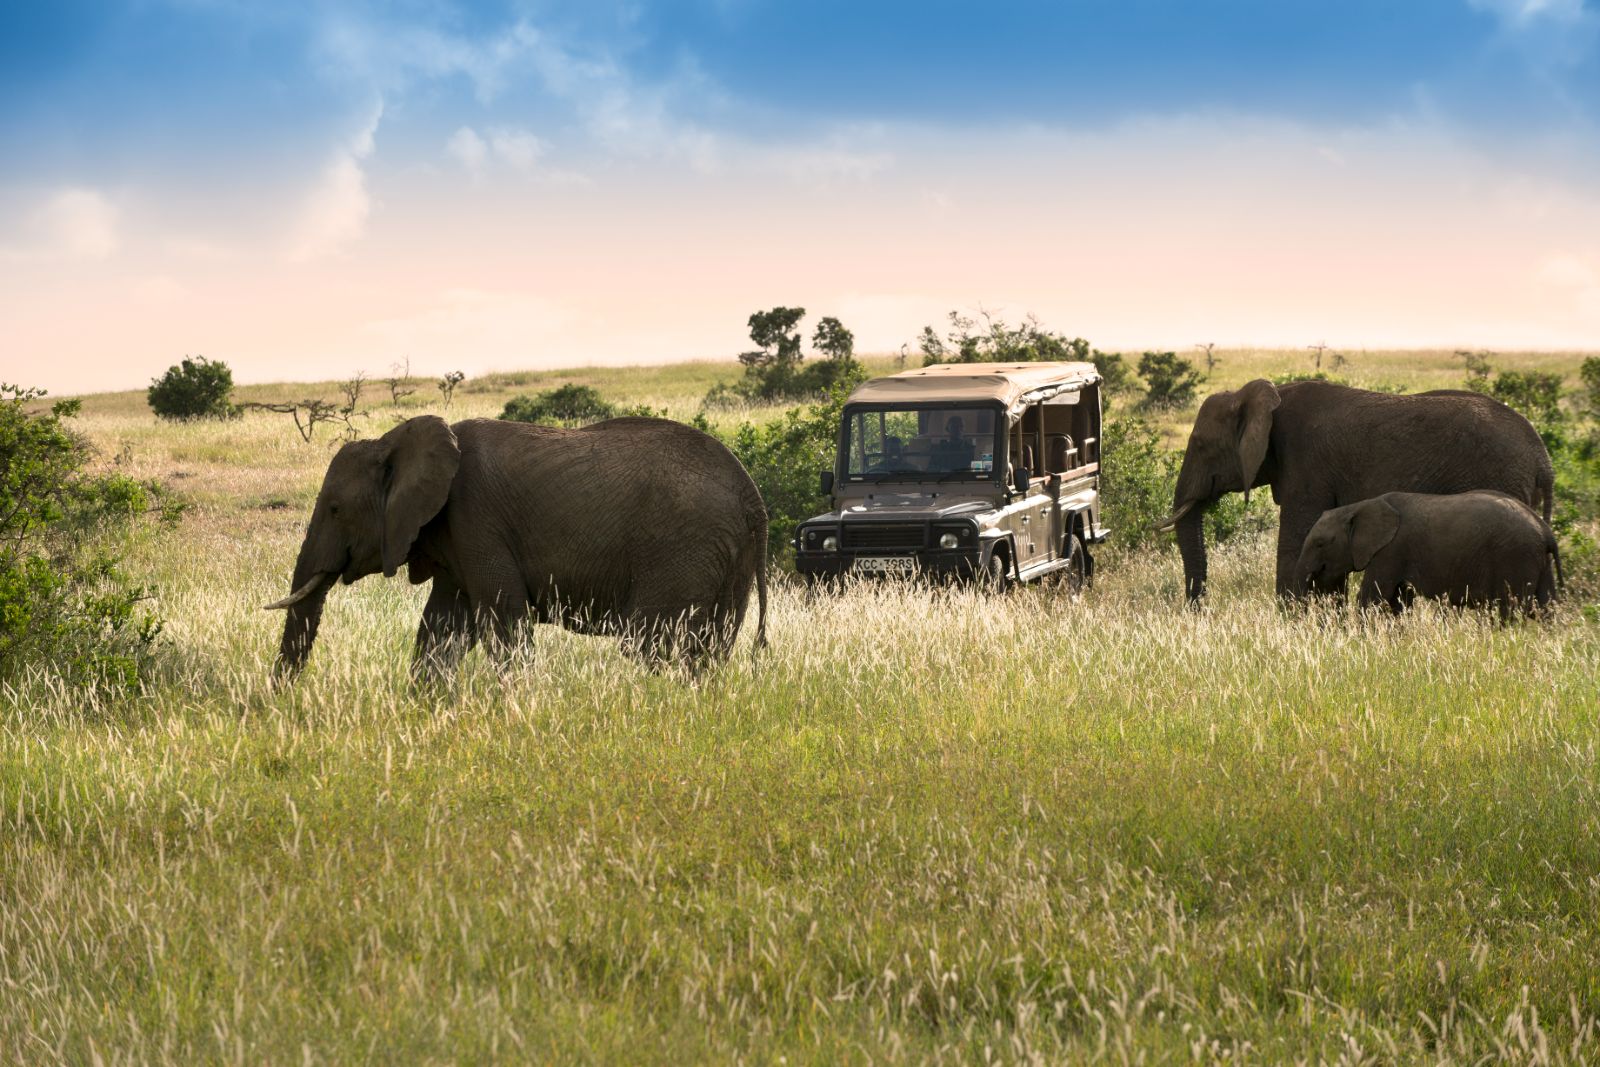 Elephants spotted on a game drive from Arjiju private house on the Borana Lewa Conservancy